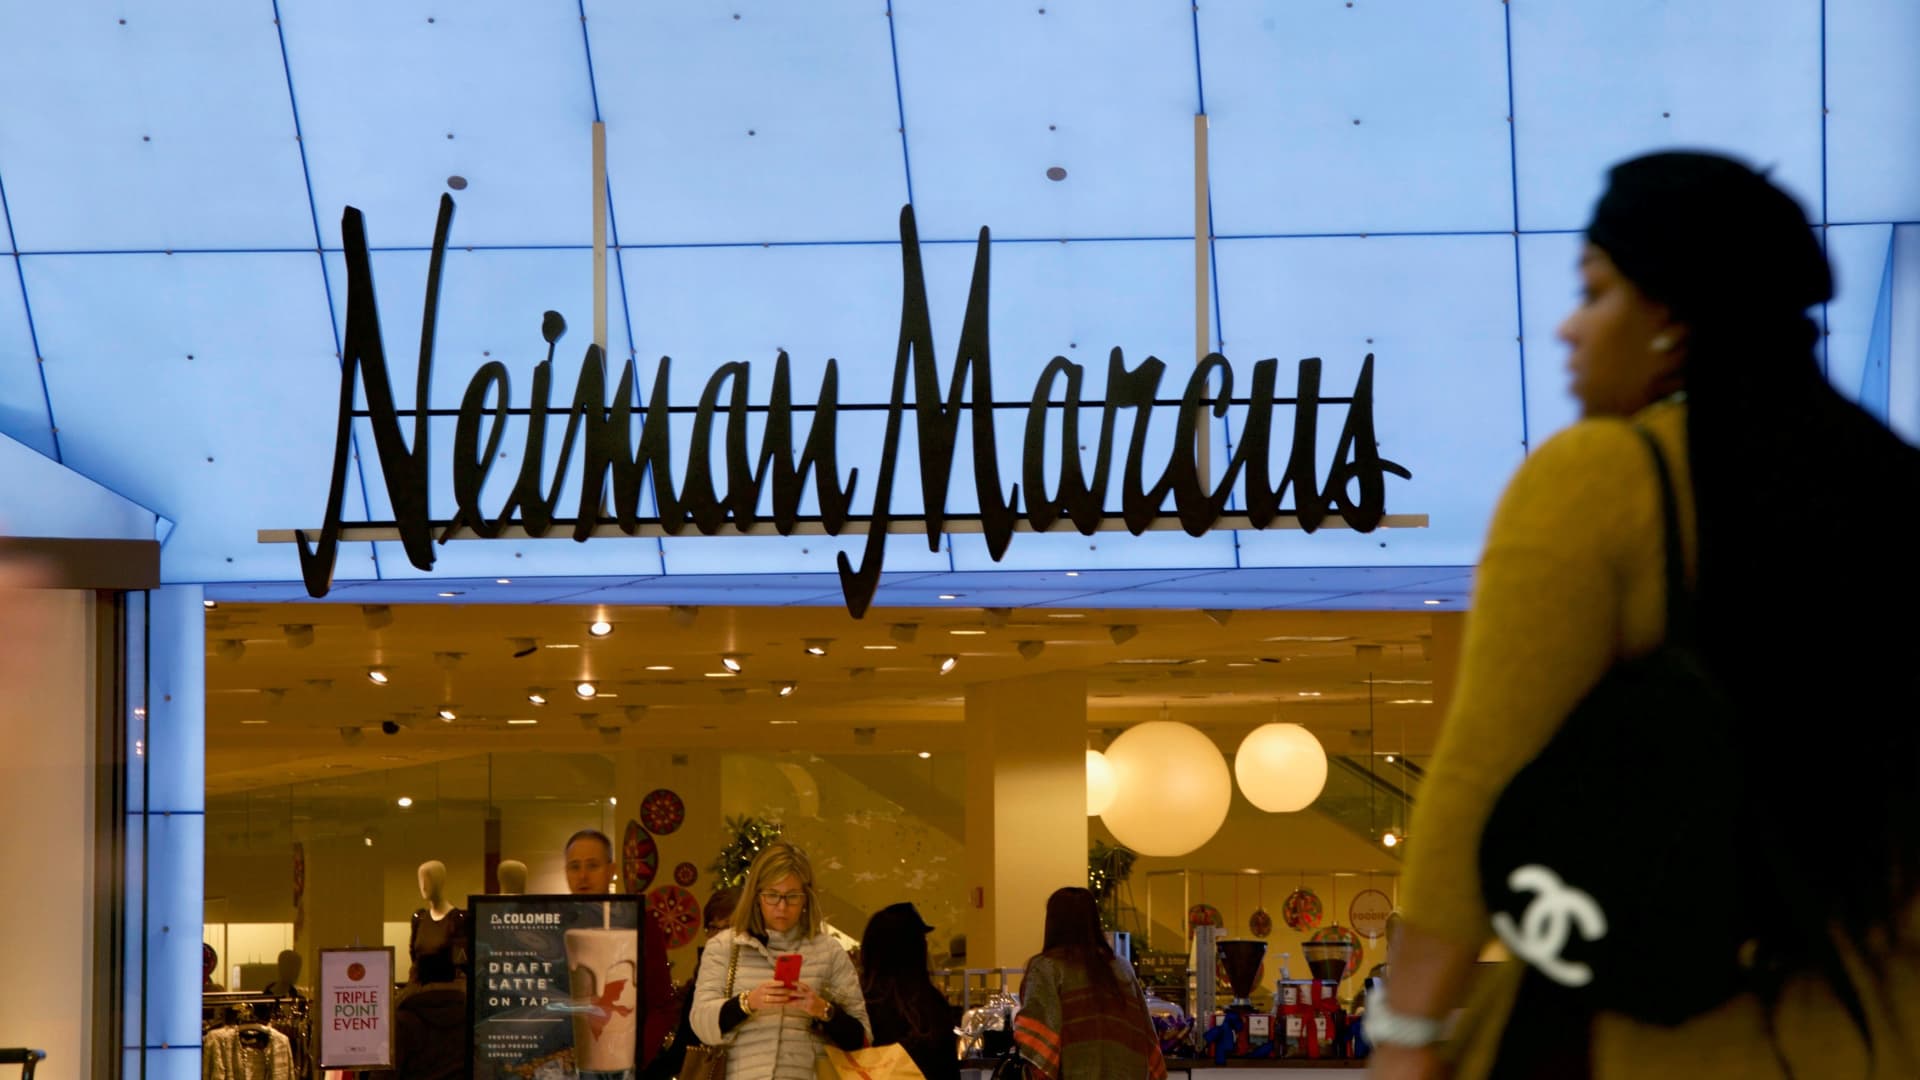 Neiman Marcus CEO says there's 'no need' to sell the business as Saks takeover rumors swirl